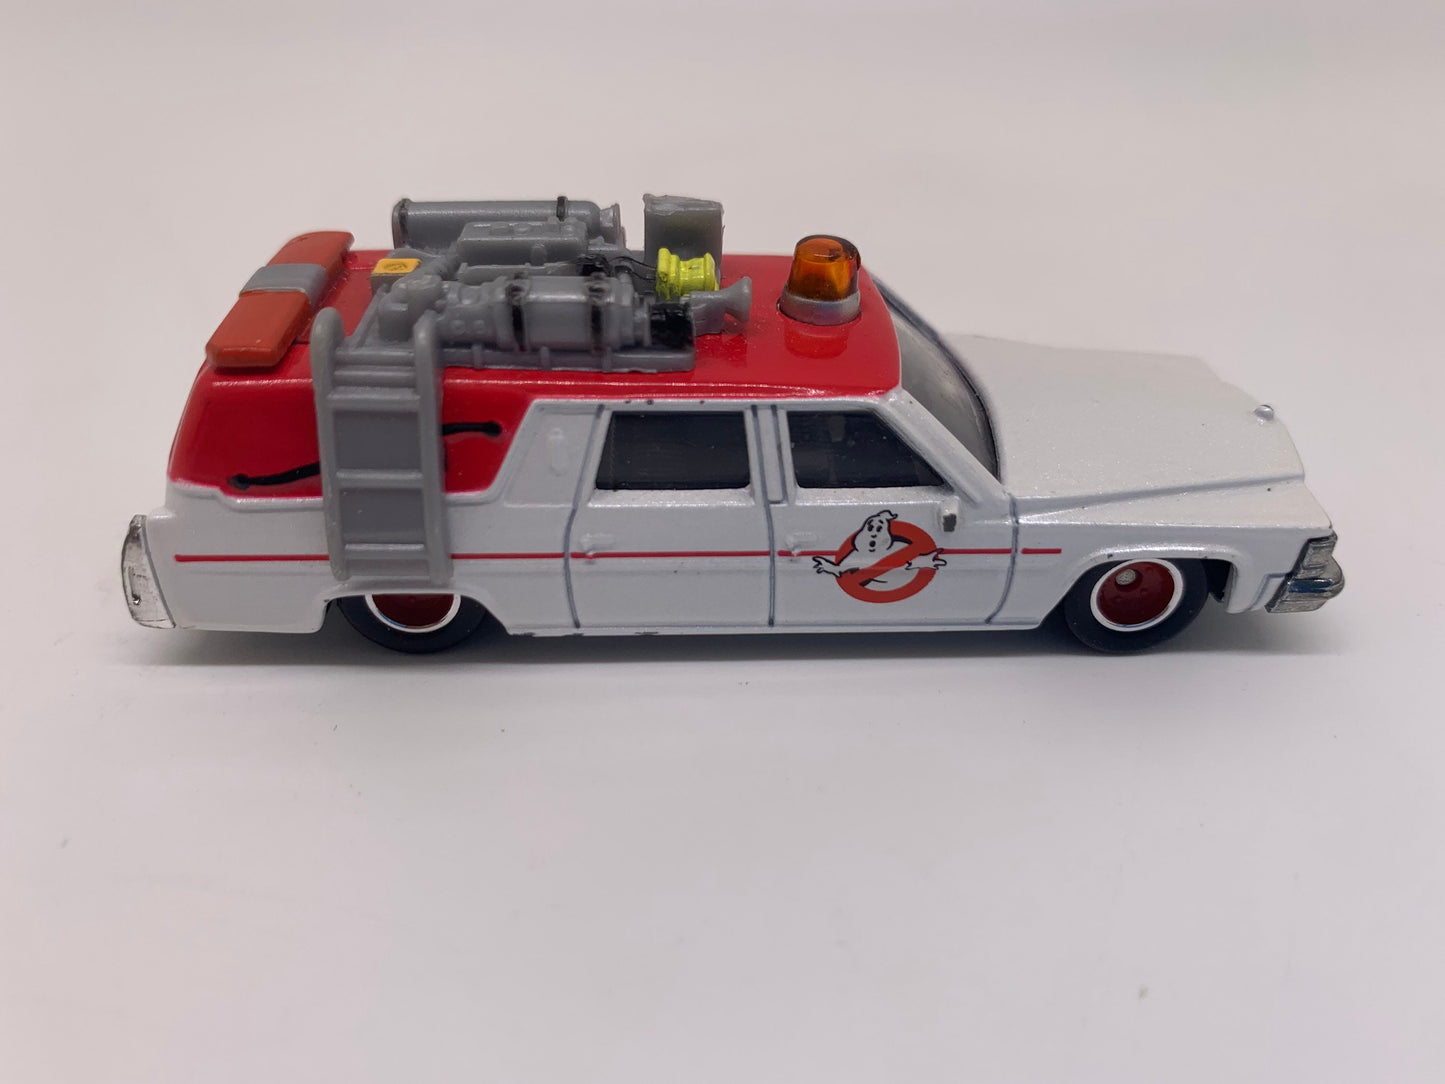 Hot Wheels Ghostbusters Ecto 1 Hot Wheels Ecto 2 White Ghostbusters Perfect Birthday Gift Collectable Scale Model Toy Car